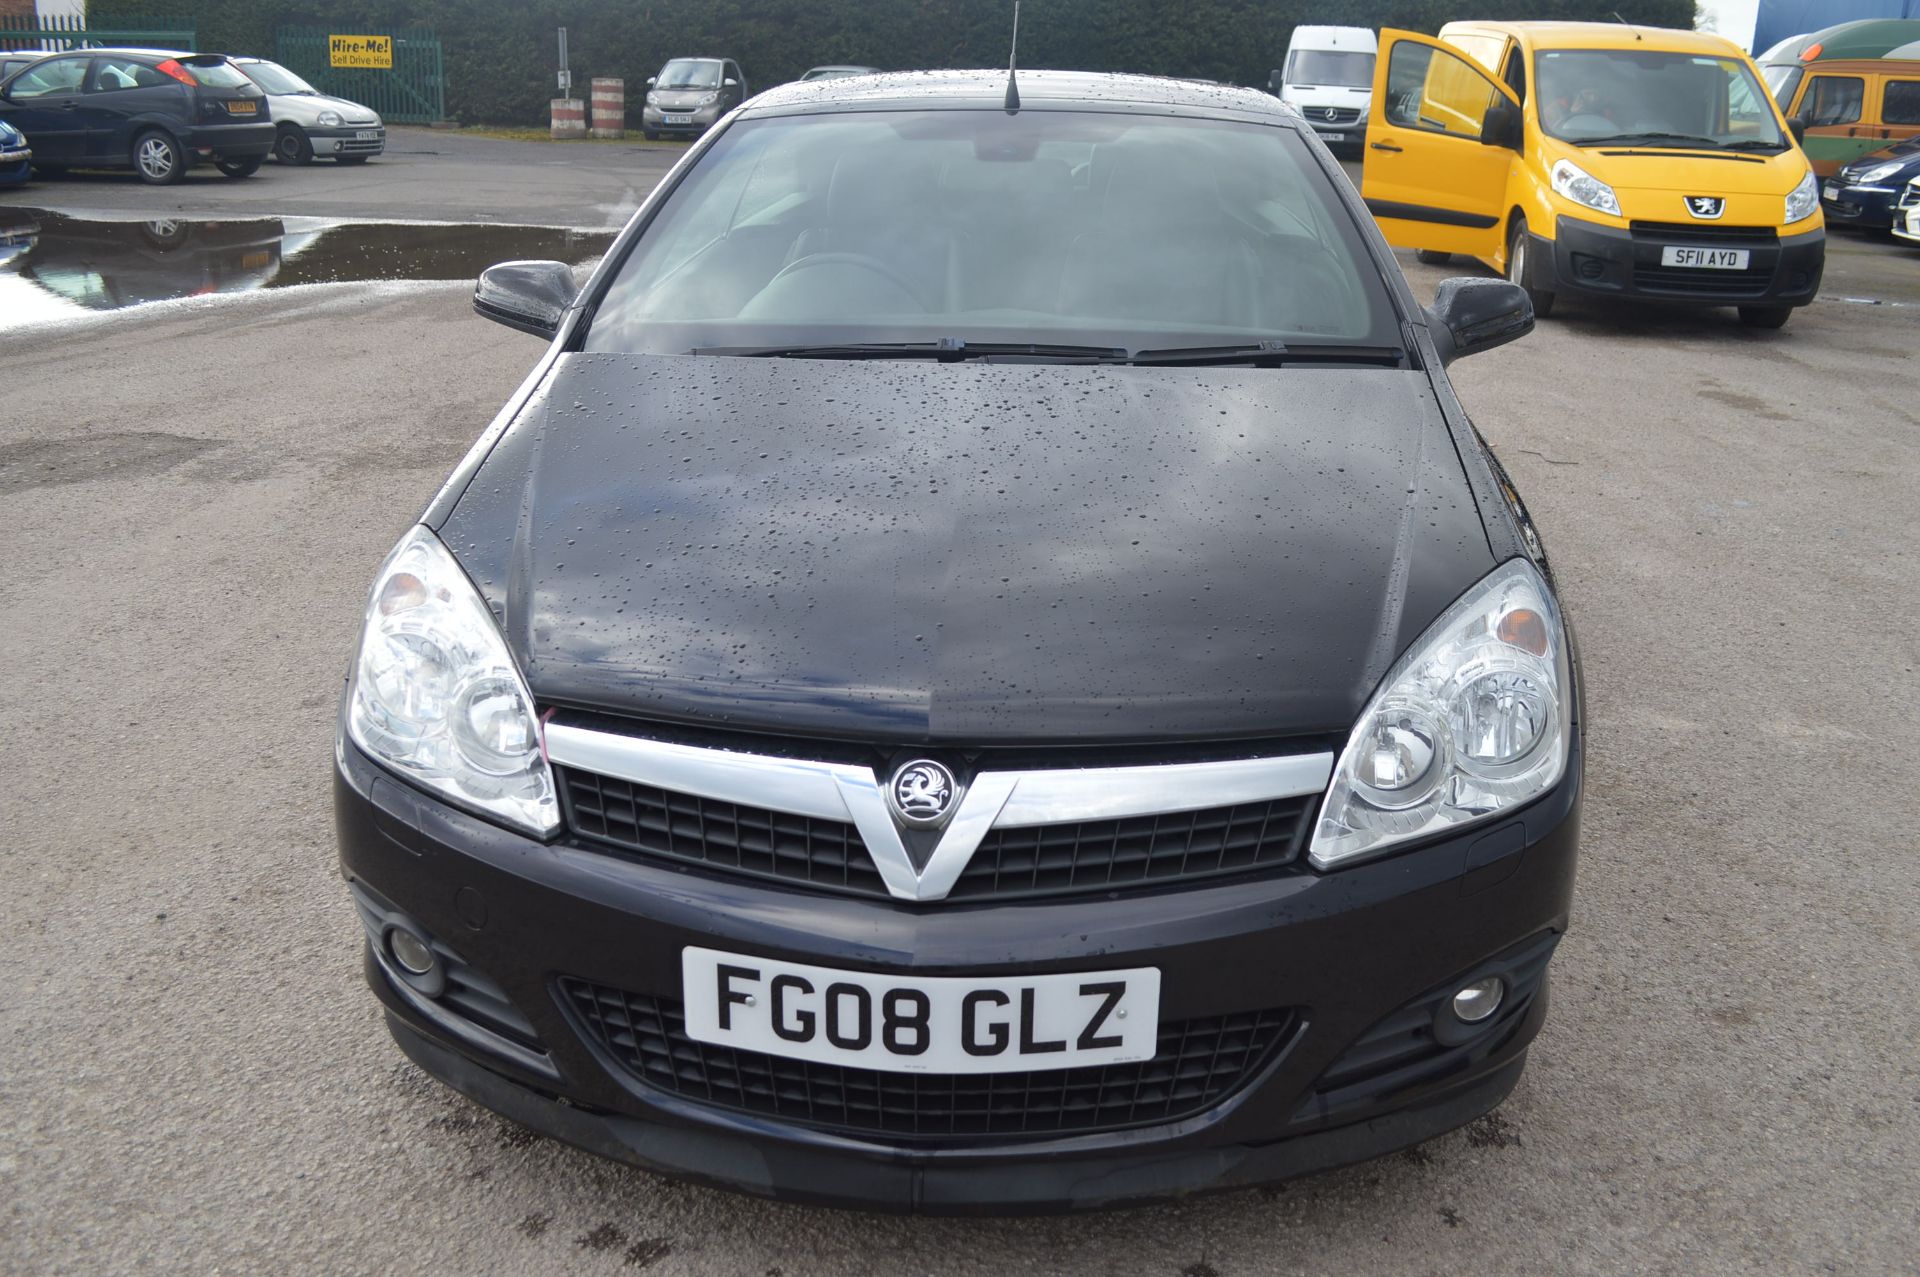 2008/08 REG VAUXHALL ASTRA T-TOP DESIGN CDTI - ROOF CAN BE PUT DOWN/UP WITH THE KEY   DATE OF - Image 20 of 20